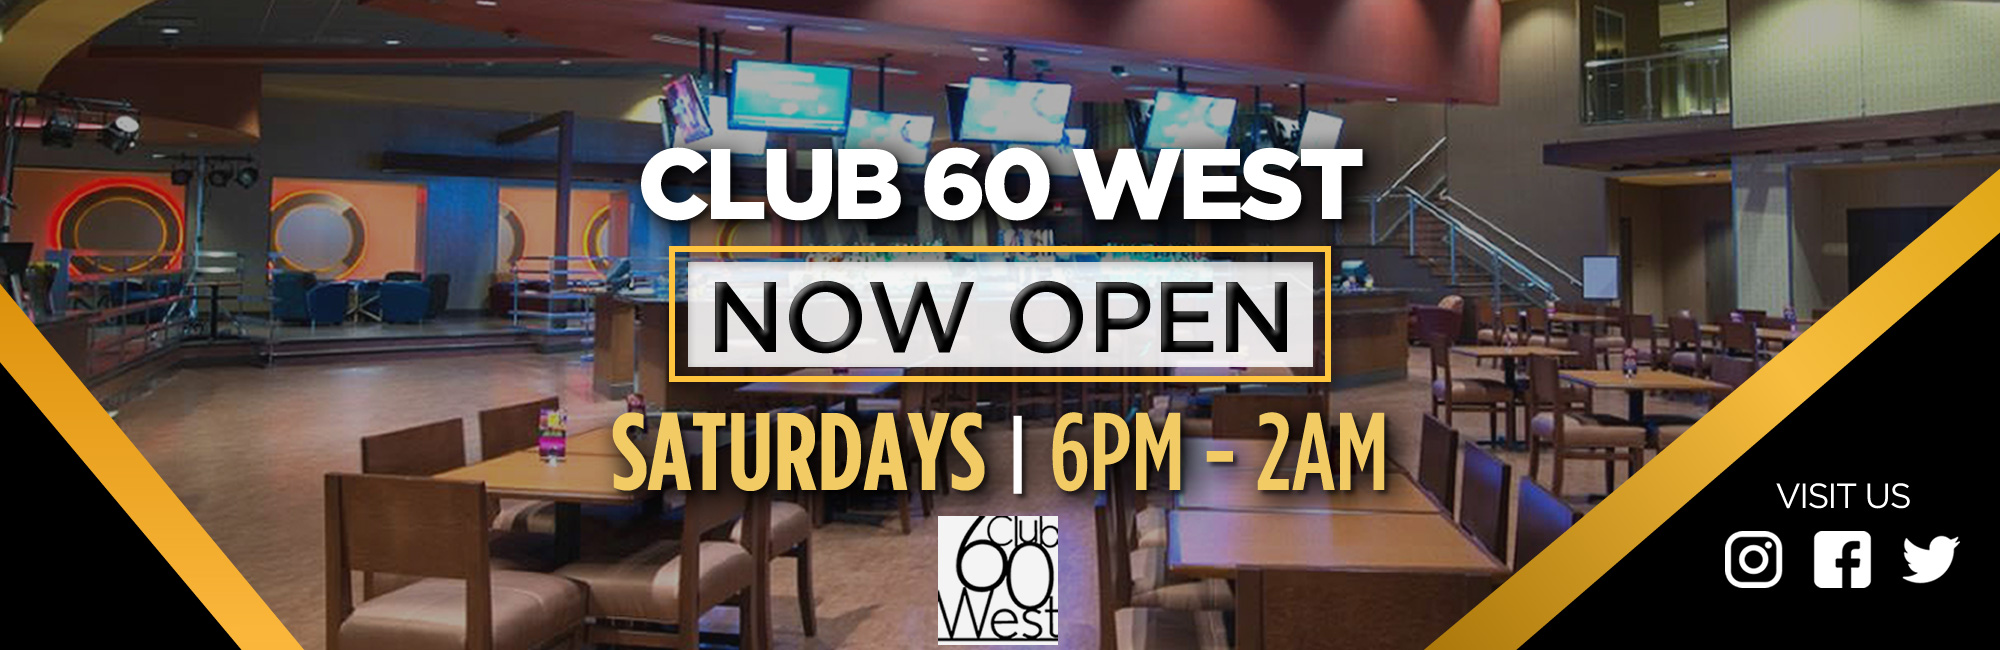 Club 60 West Now Open